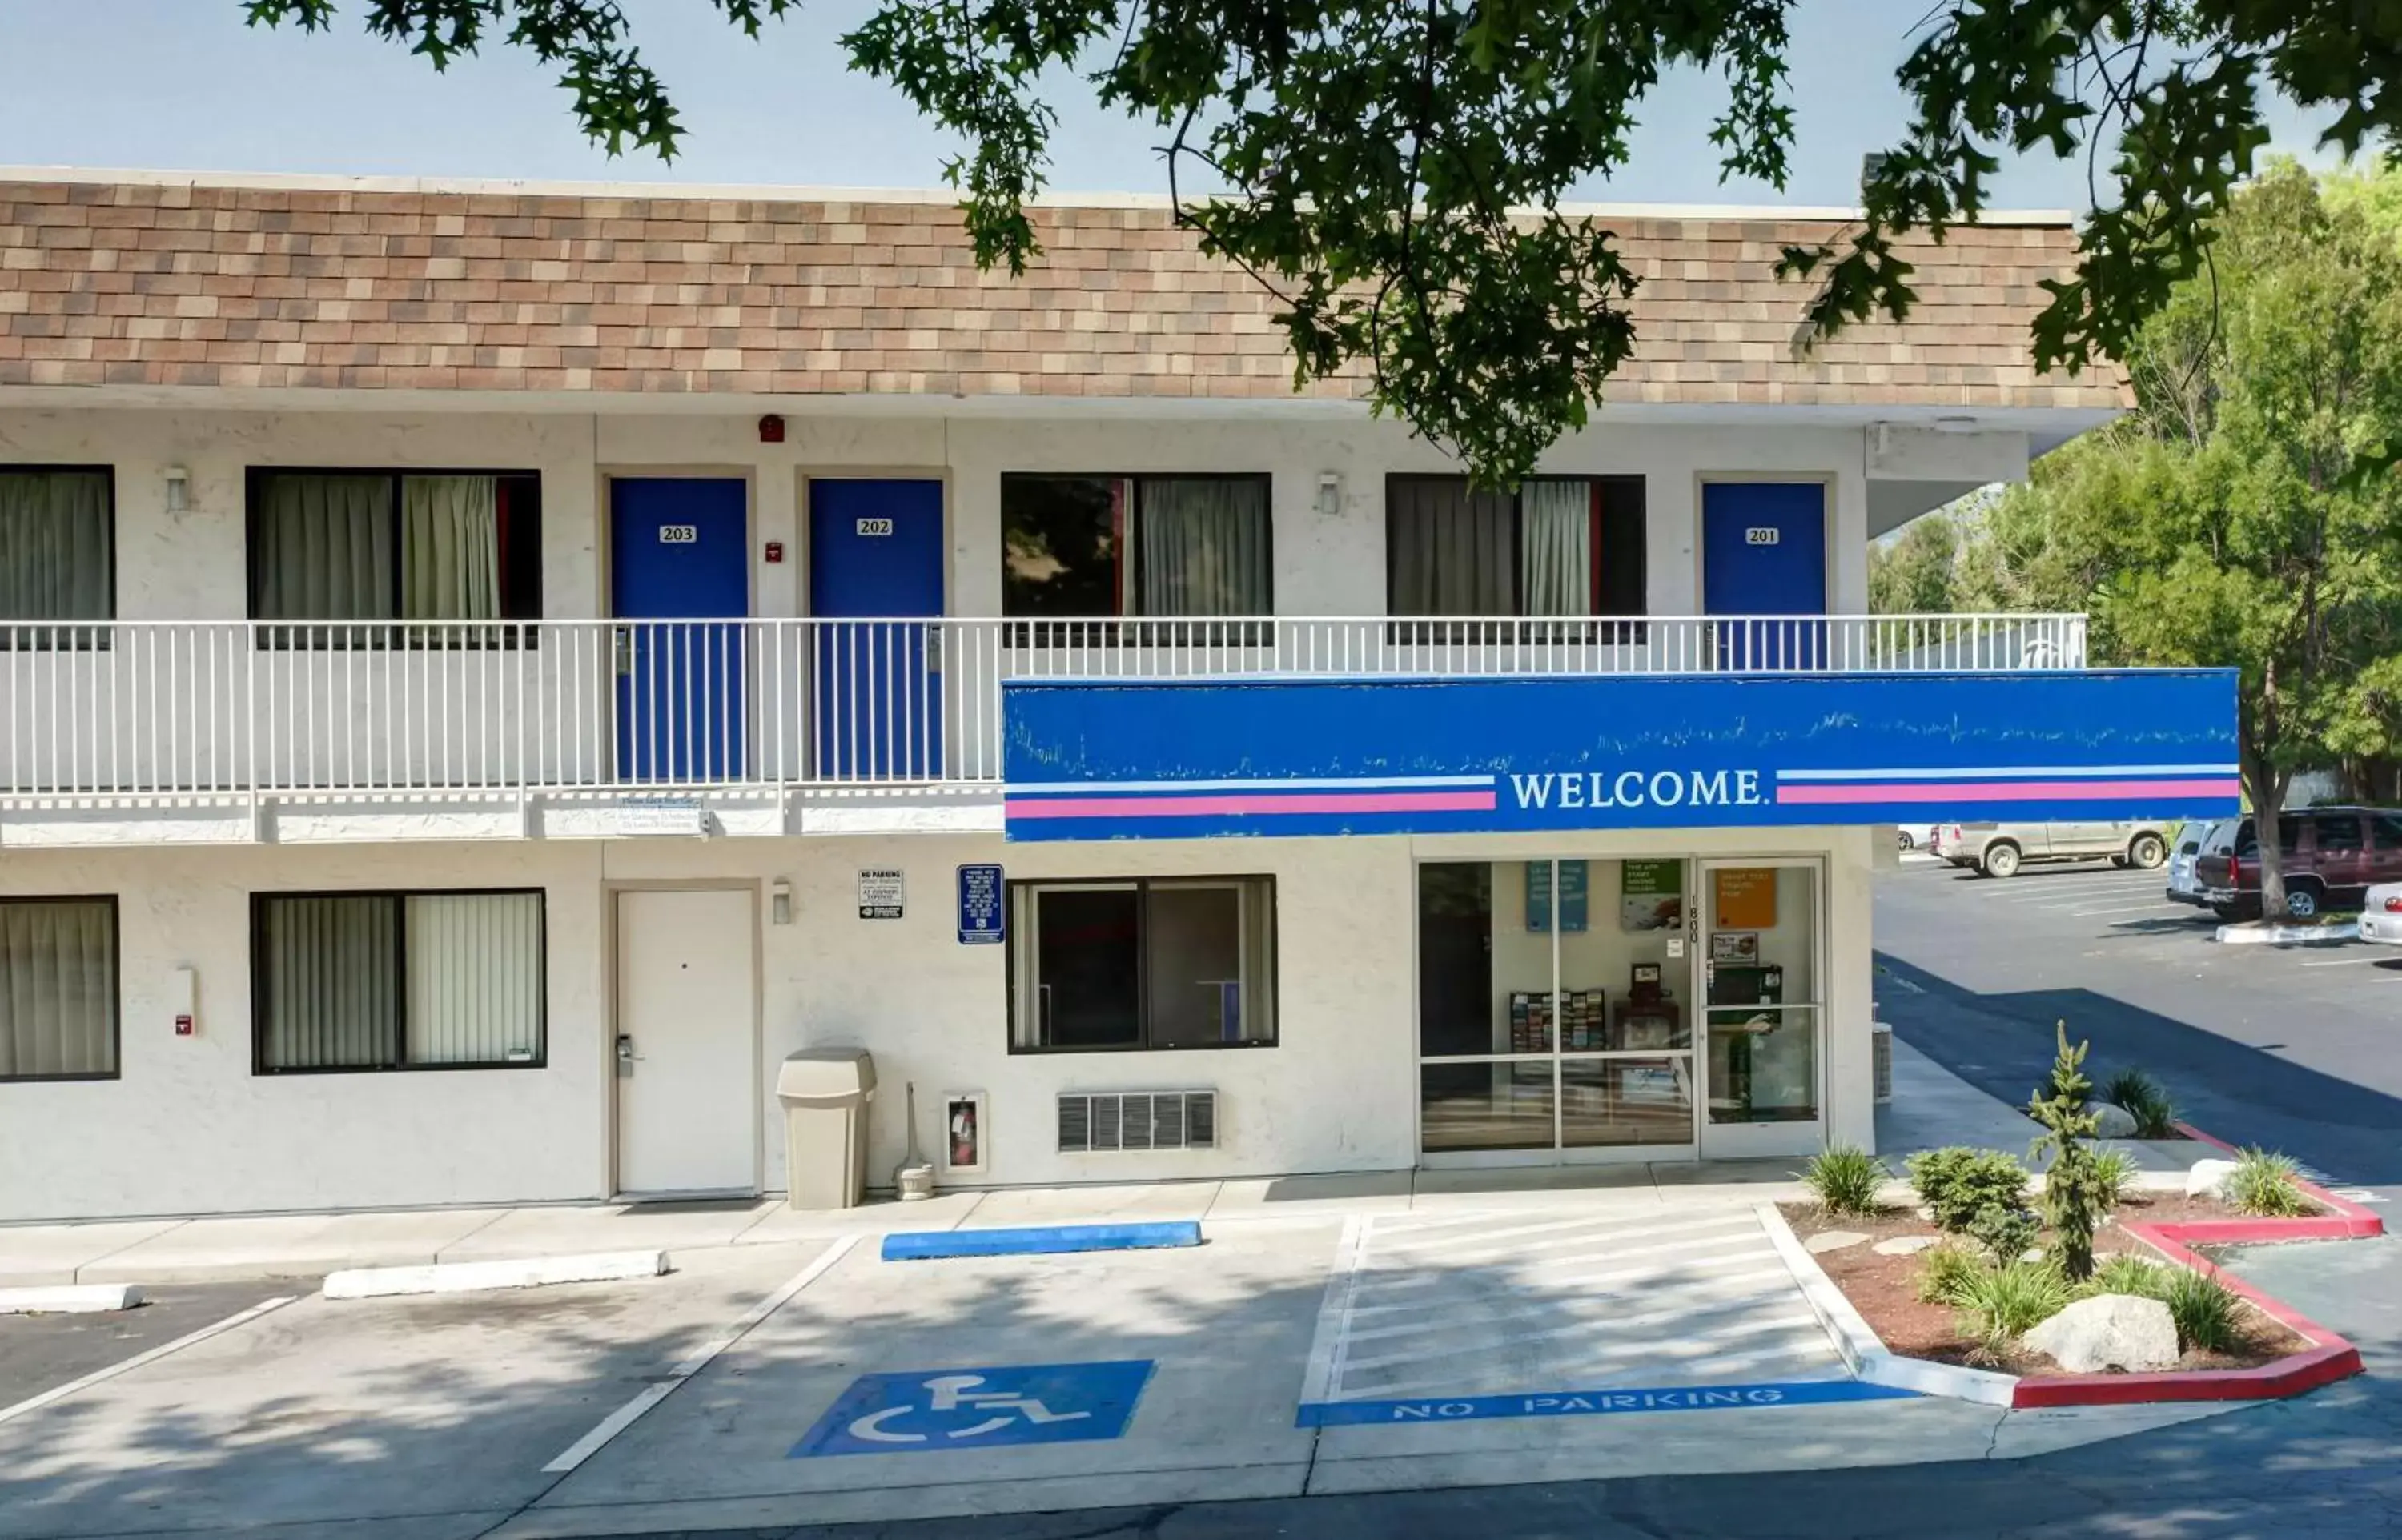 Property building, Facade/Entrance in Motel 6-Grants Pass, OR